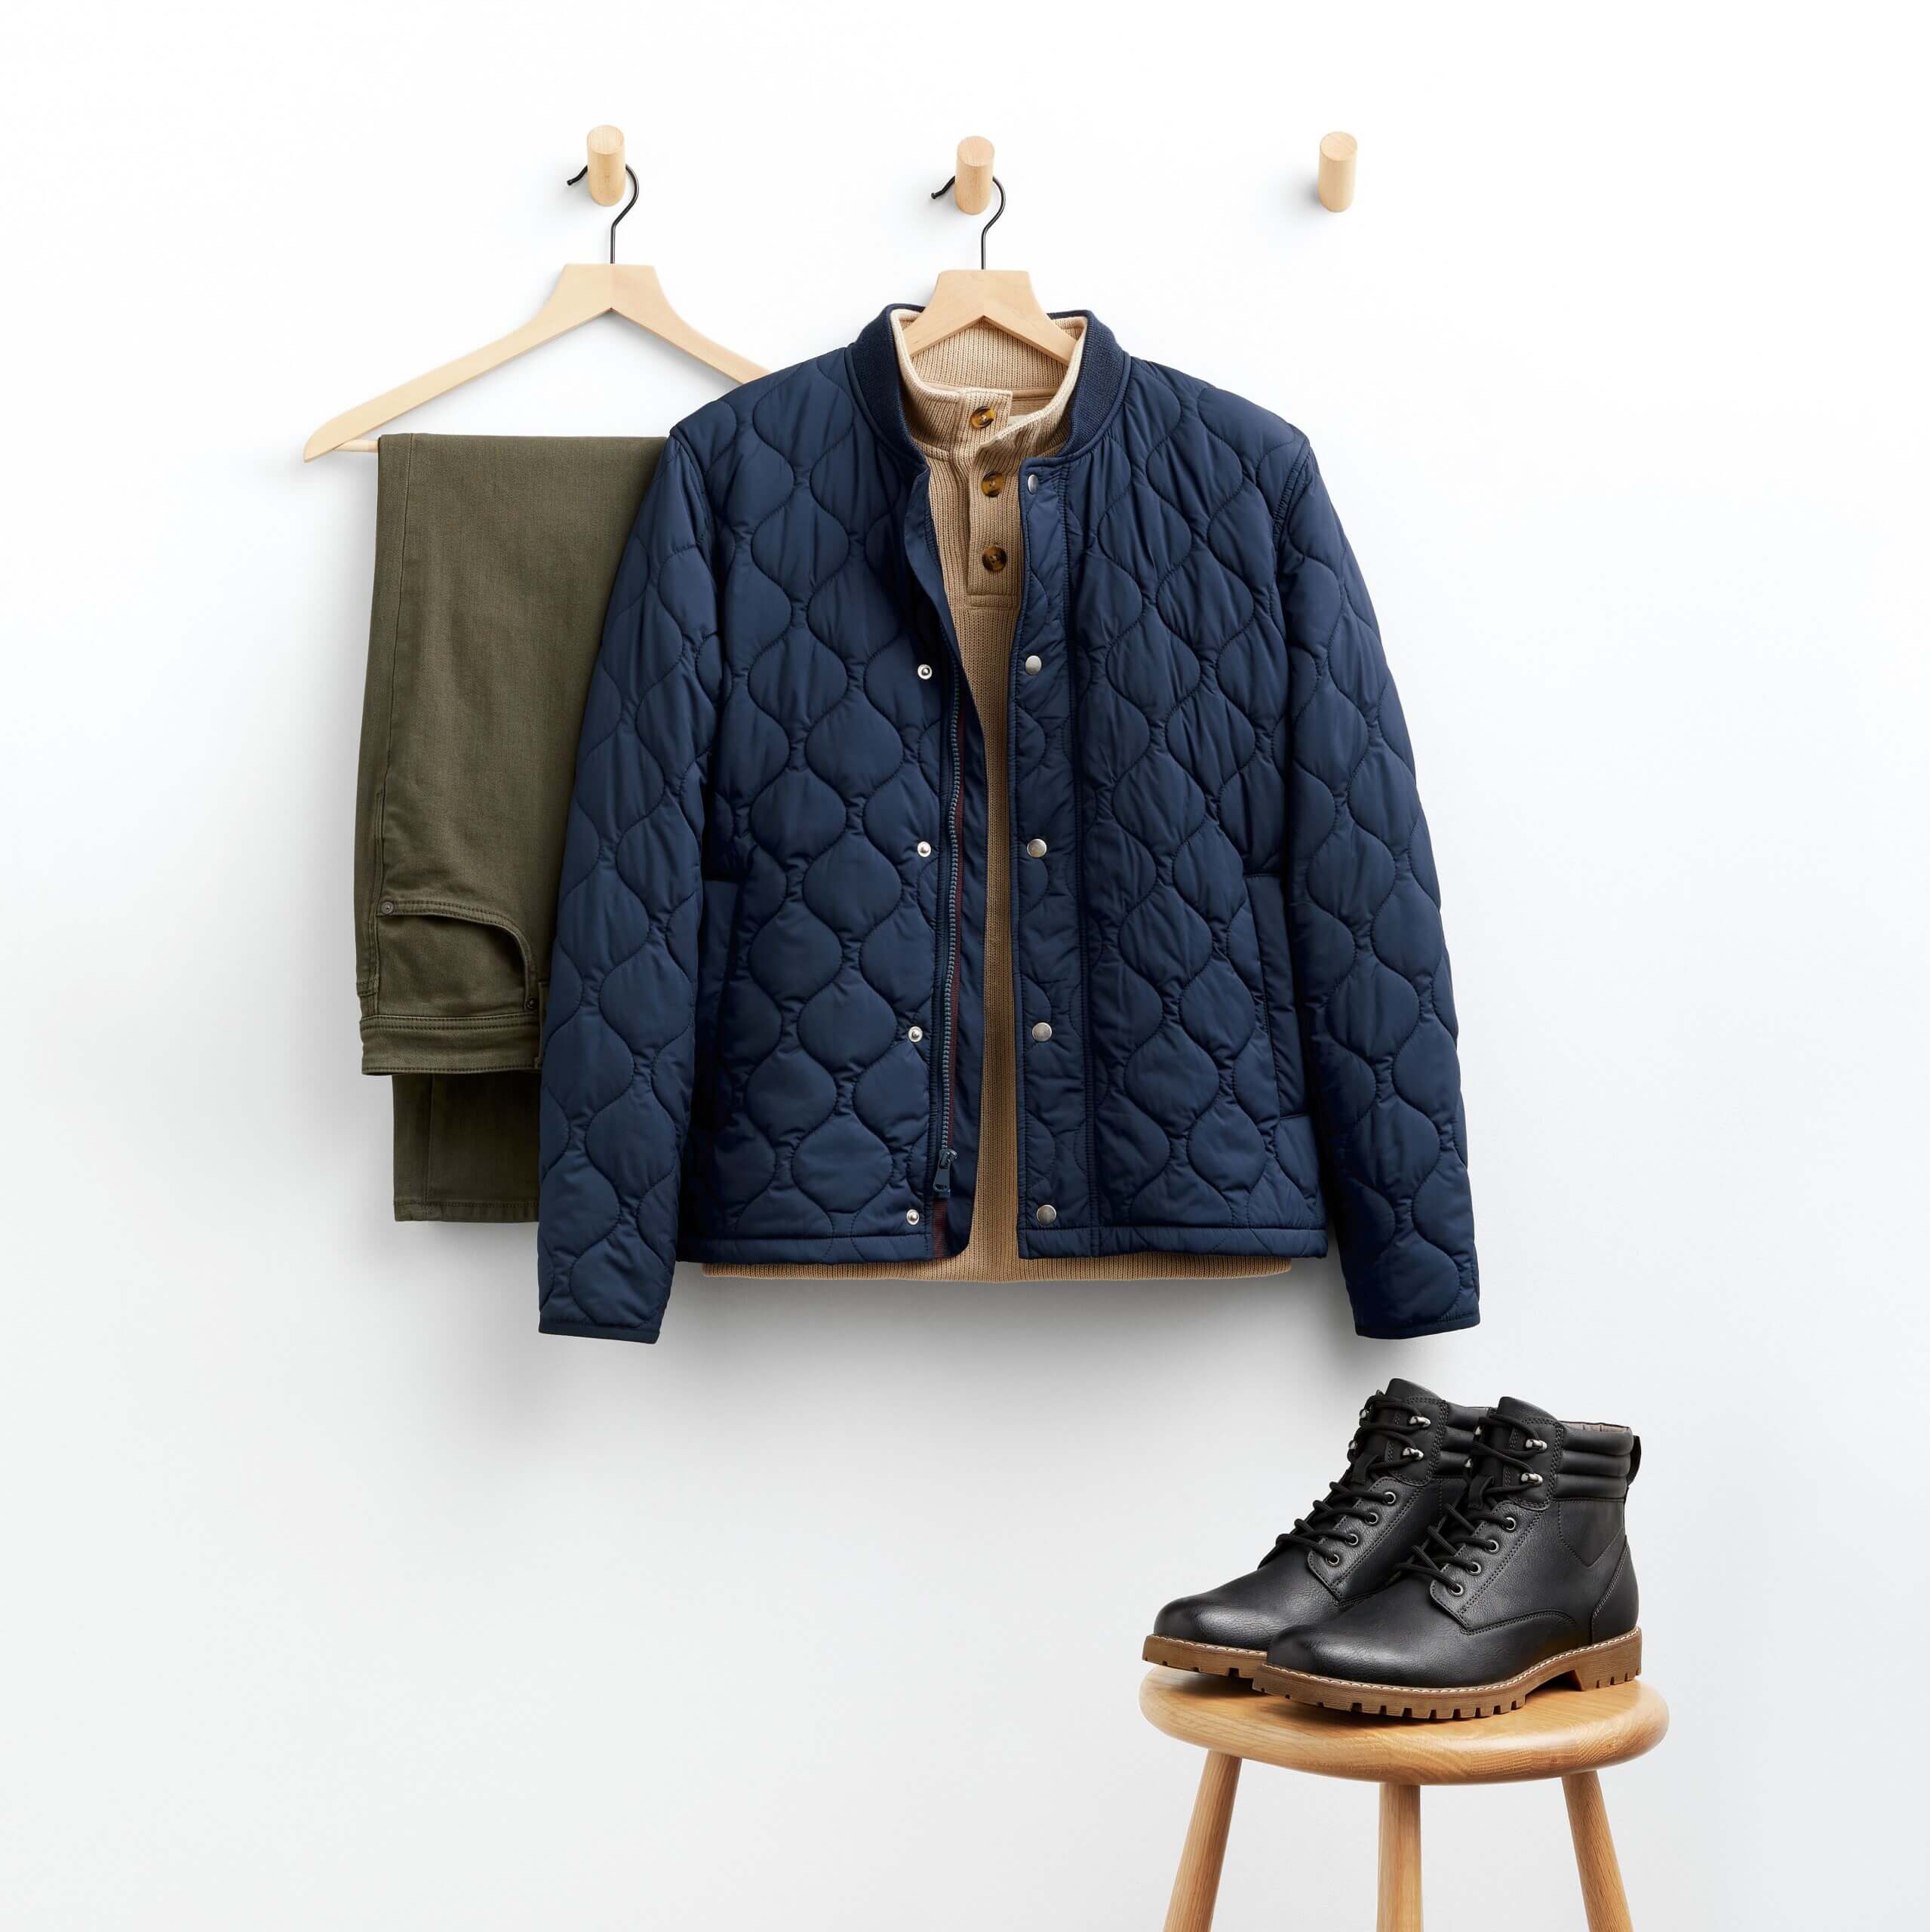 Stitch Fix men’s outfit for shorter men featuring green pants, tan sweater and navy quilted puffer jacket hanging next to black hiking boots sitting on wooden stool.